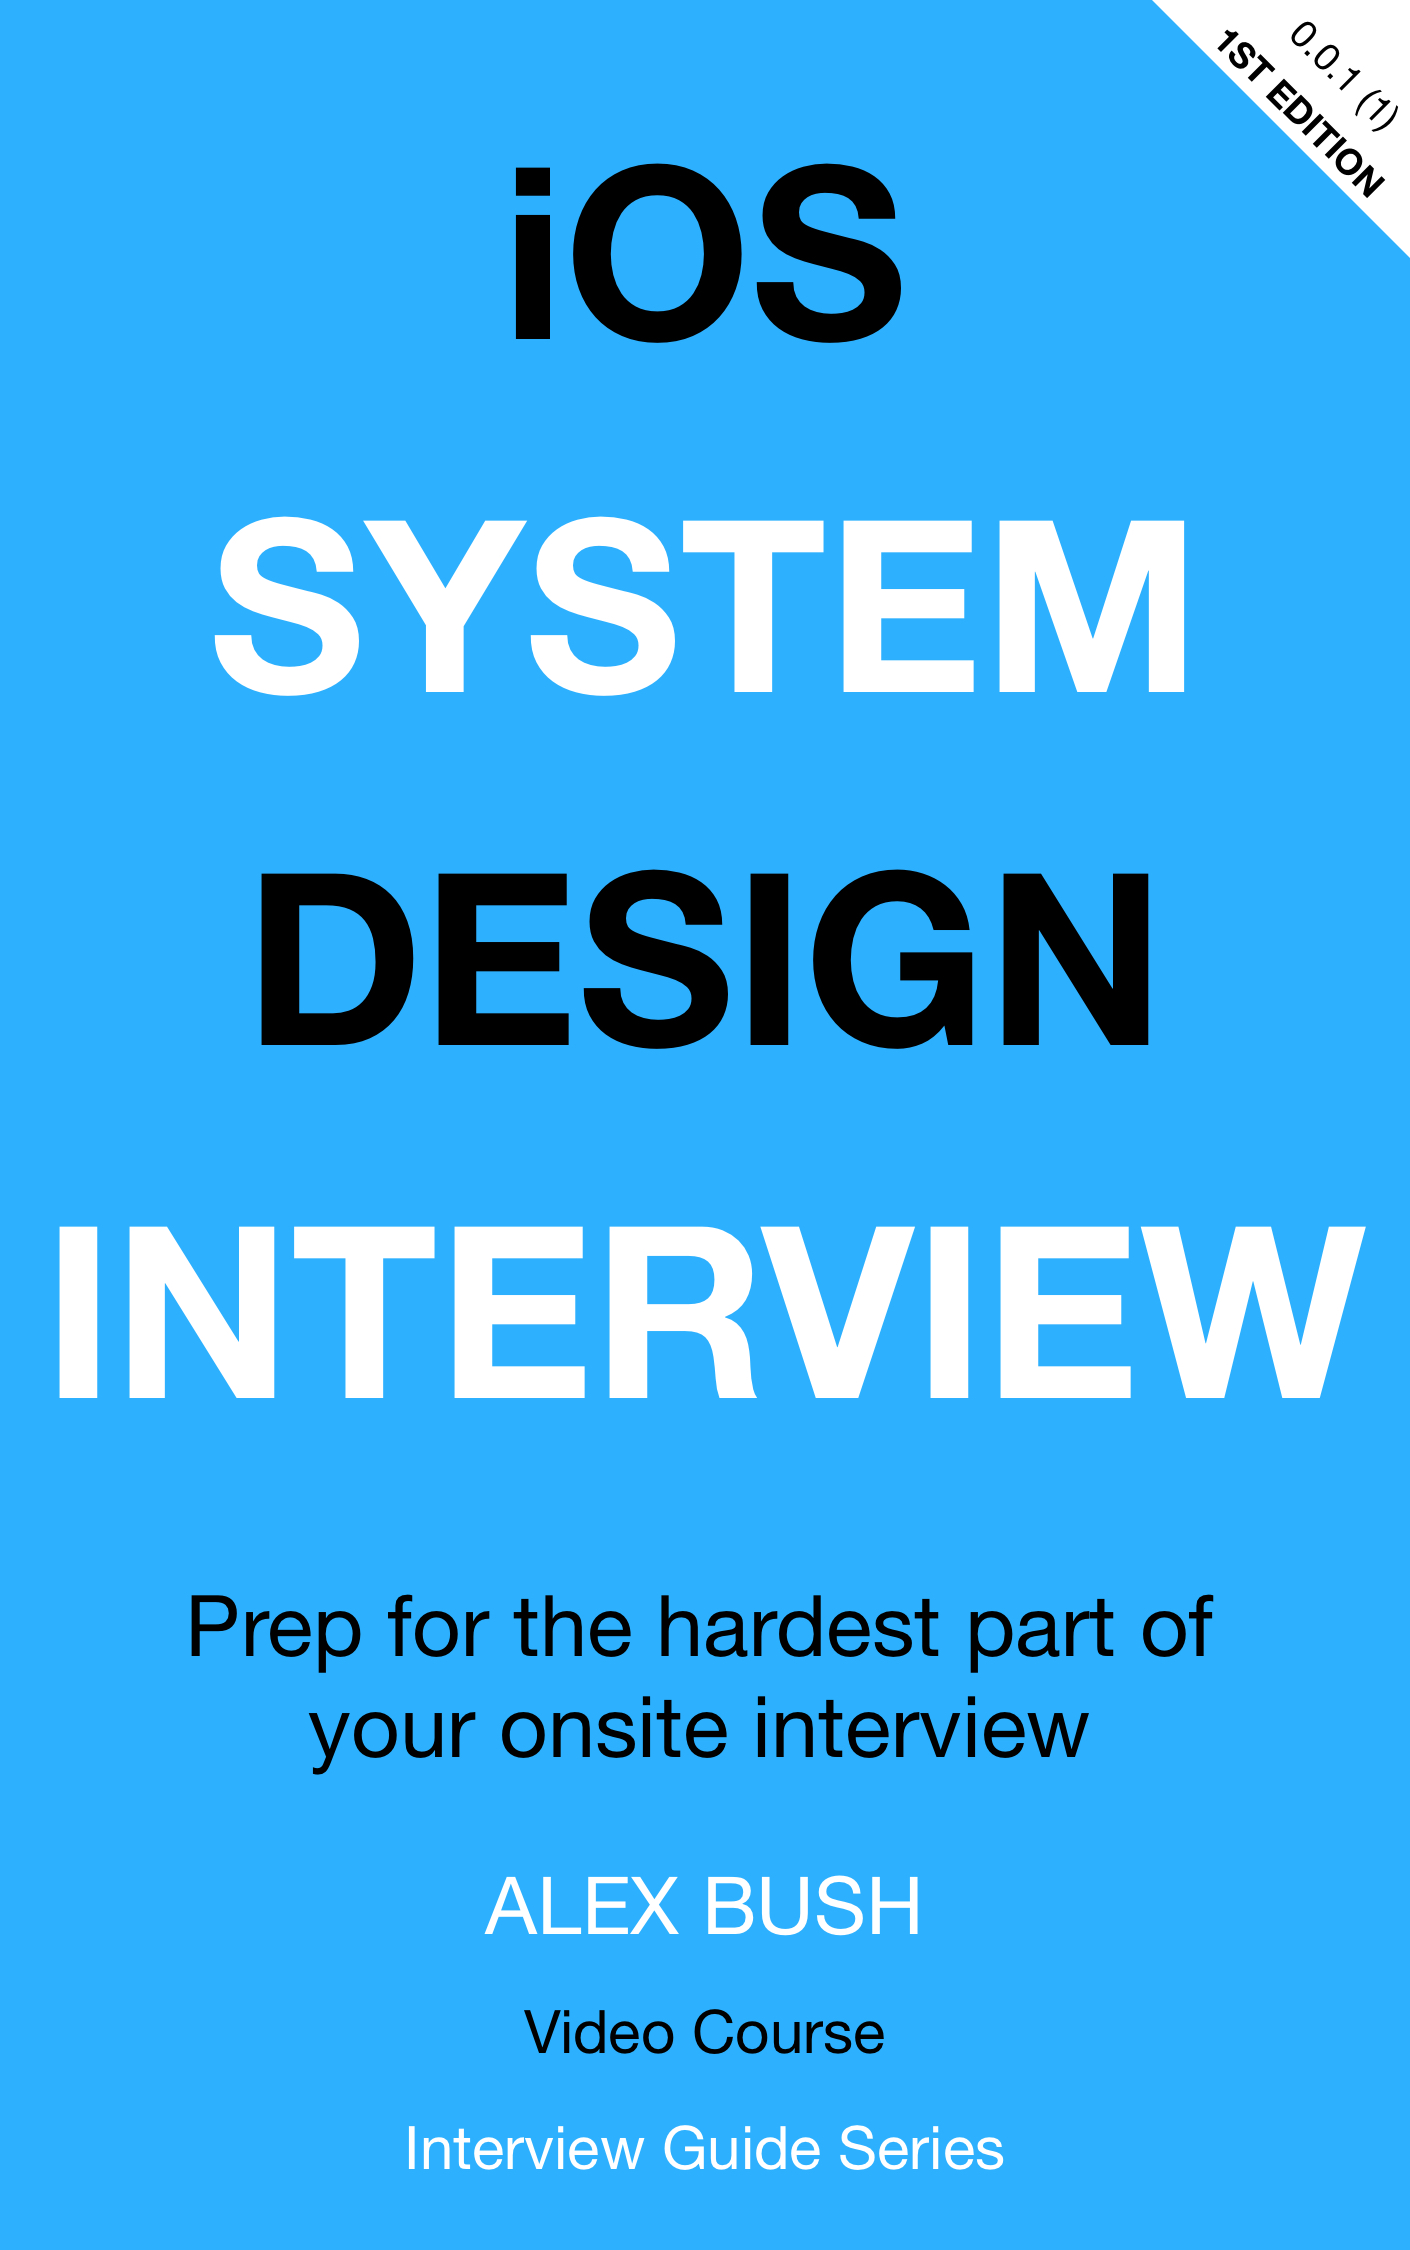 The iOS System Design Interview Course Cover